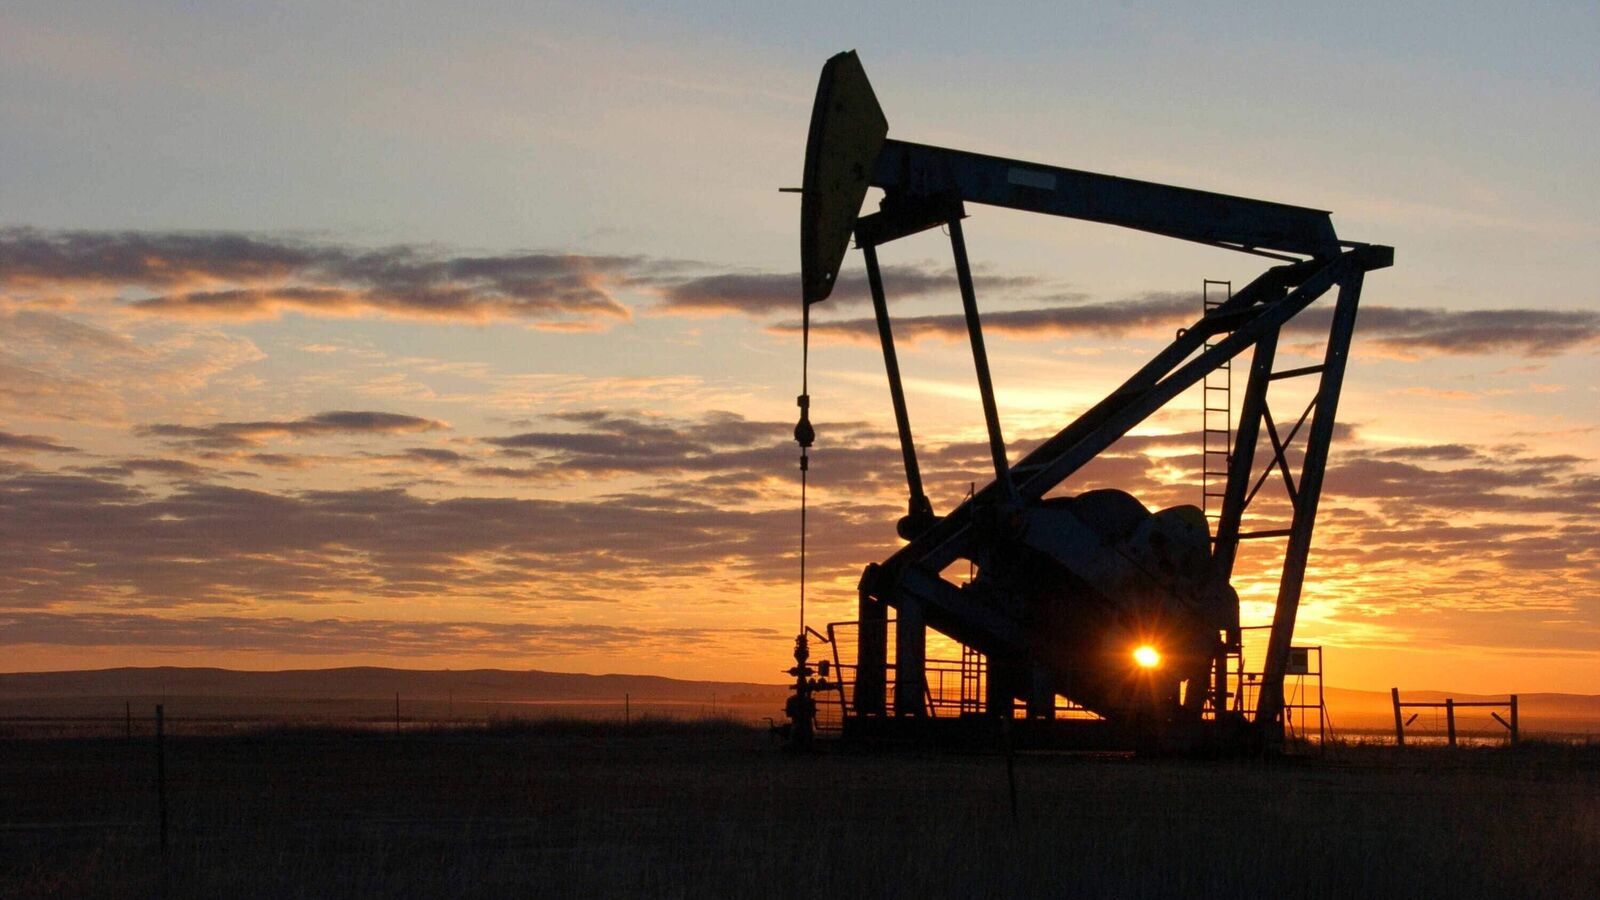 Oil surges ahead of inflation data after lacklustre week; brent crude at $82.88/bbl